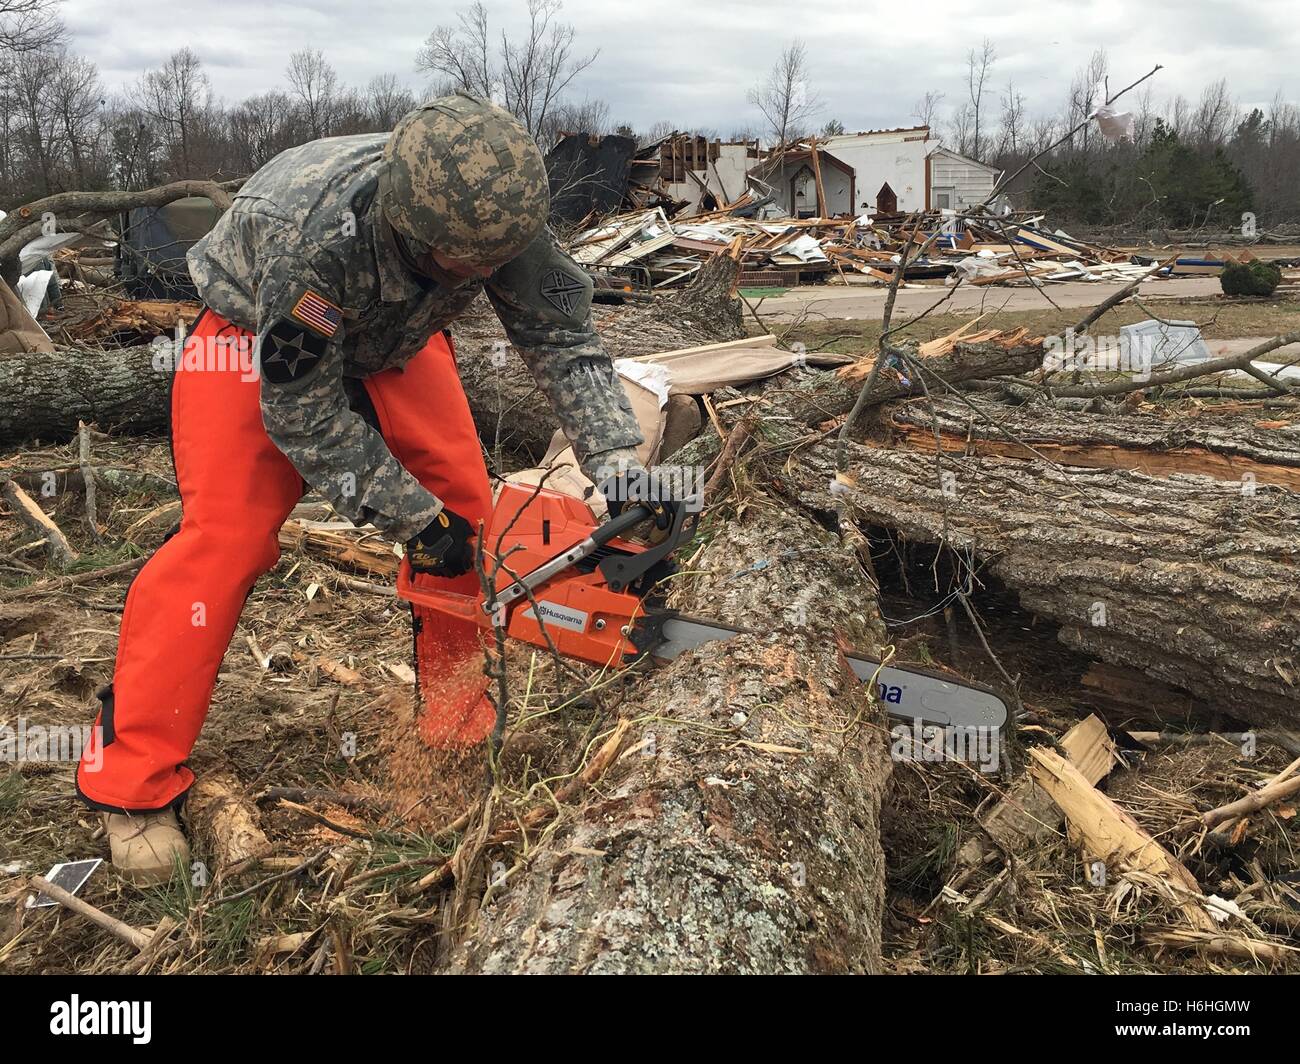 National Guard soldiers cut down fallen trees to and clear debris to open a blocked road after a severe storm and tornado February 25, 2016 in Essex County, Virginia. Stock Photo